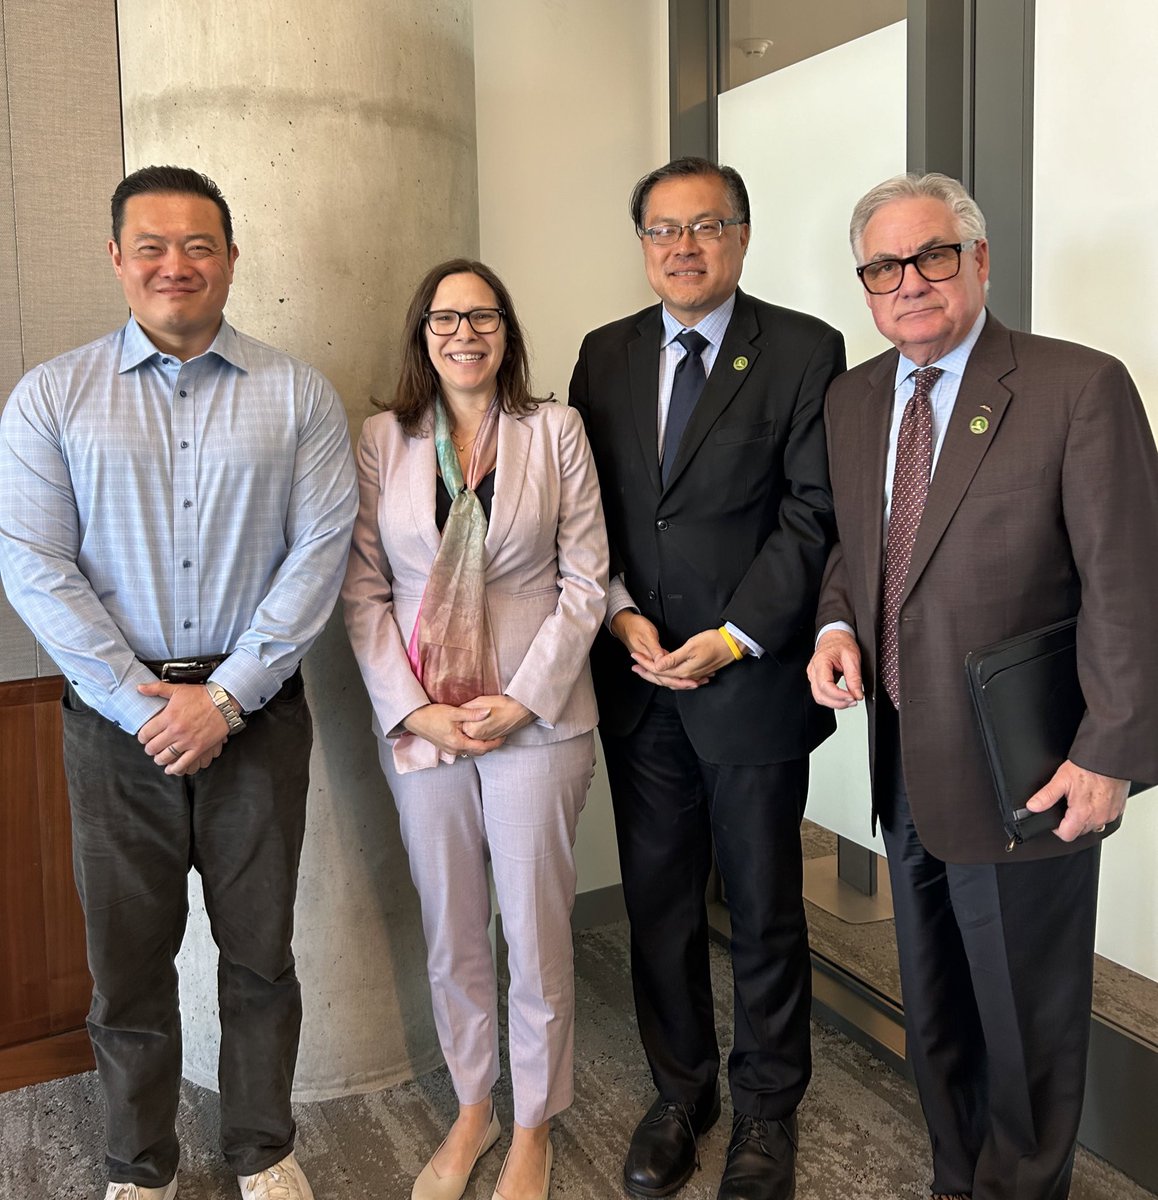 Was a privilege to meet with a group of California House Assembly Members, including @MikeFongCA, @PhillipChenCA and @JimPatterson559 to learn about their various districts’ ongoing engagement with Taiwan. Many thanks for the interesting and productive conversation.